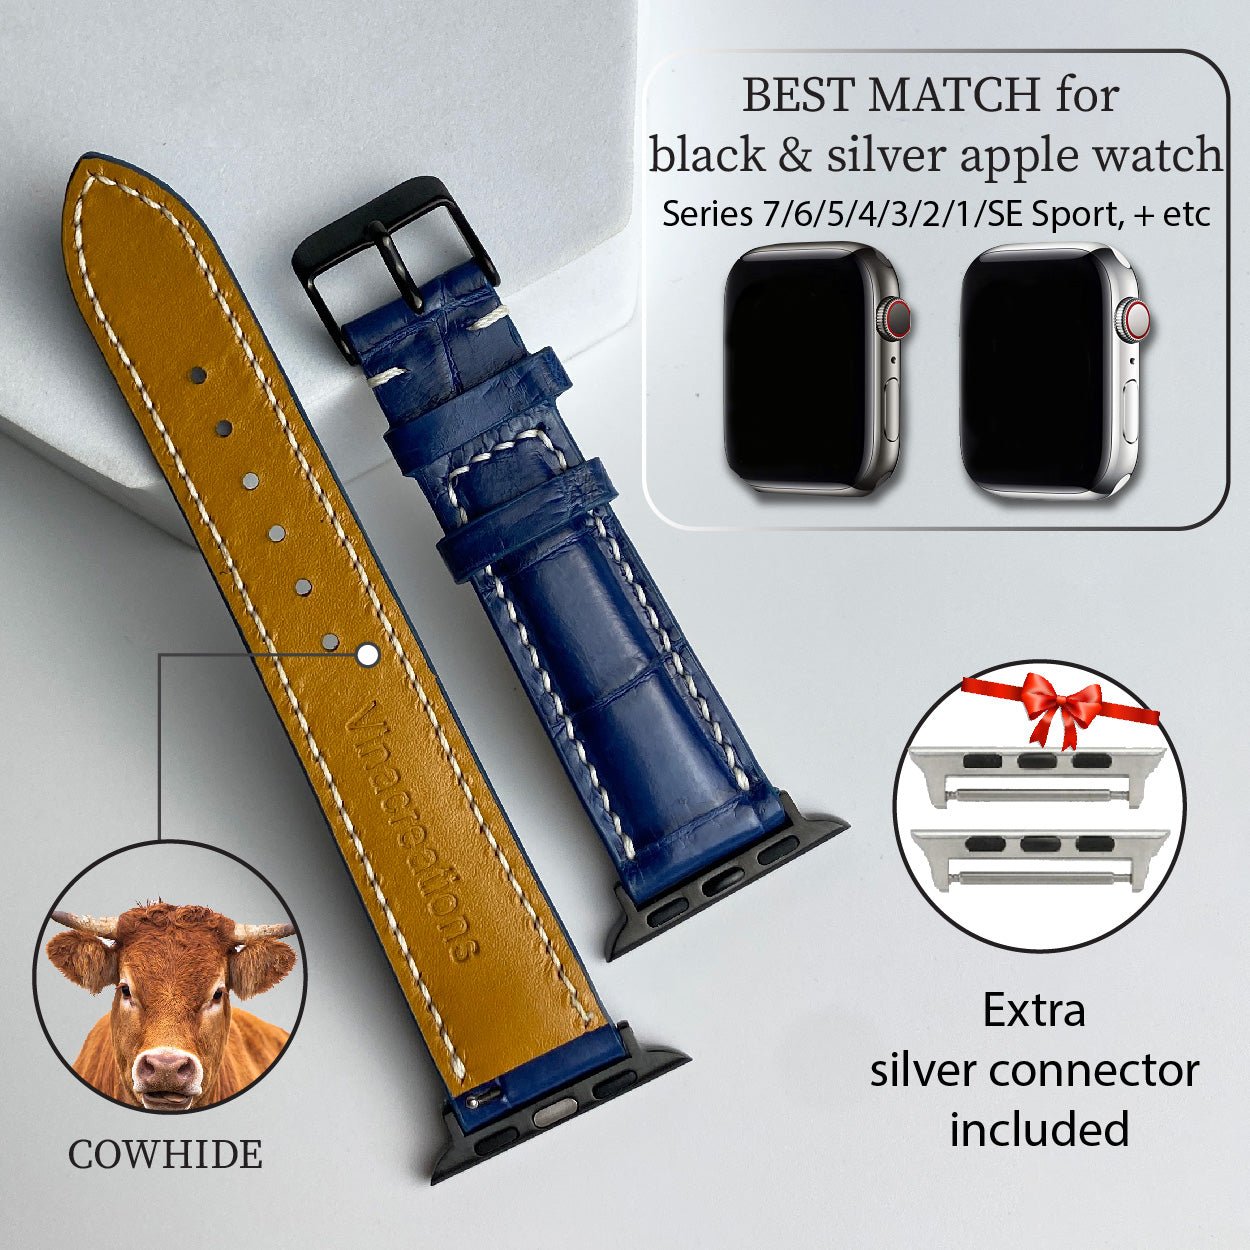 White Hand Stitching Navy Blue Alligator Leather Watch Band Compatible with Apple Watch IWatch Series 7 6 5 4 3 2 1 | AW-156 - Vinacreations